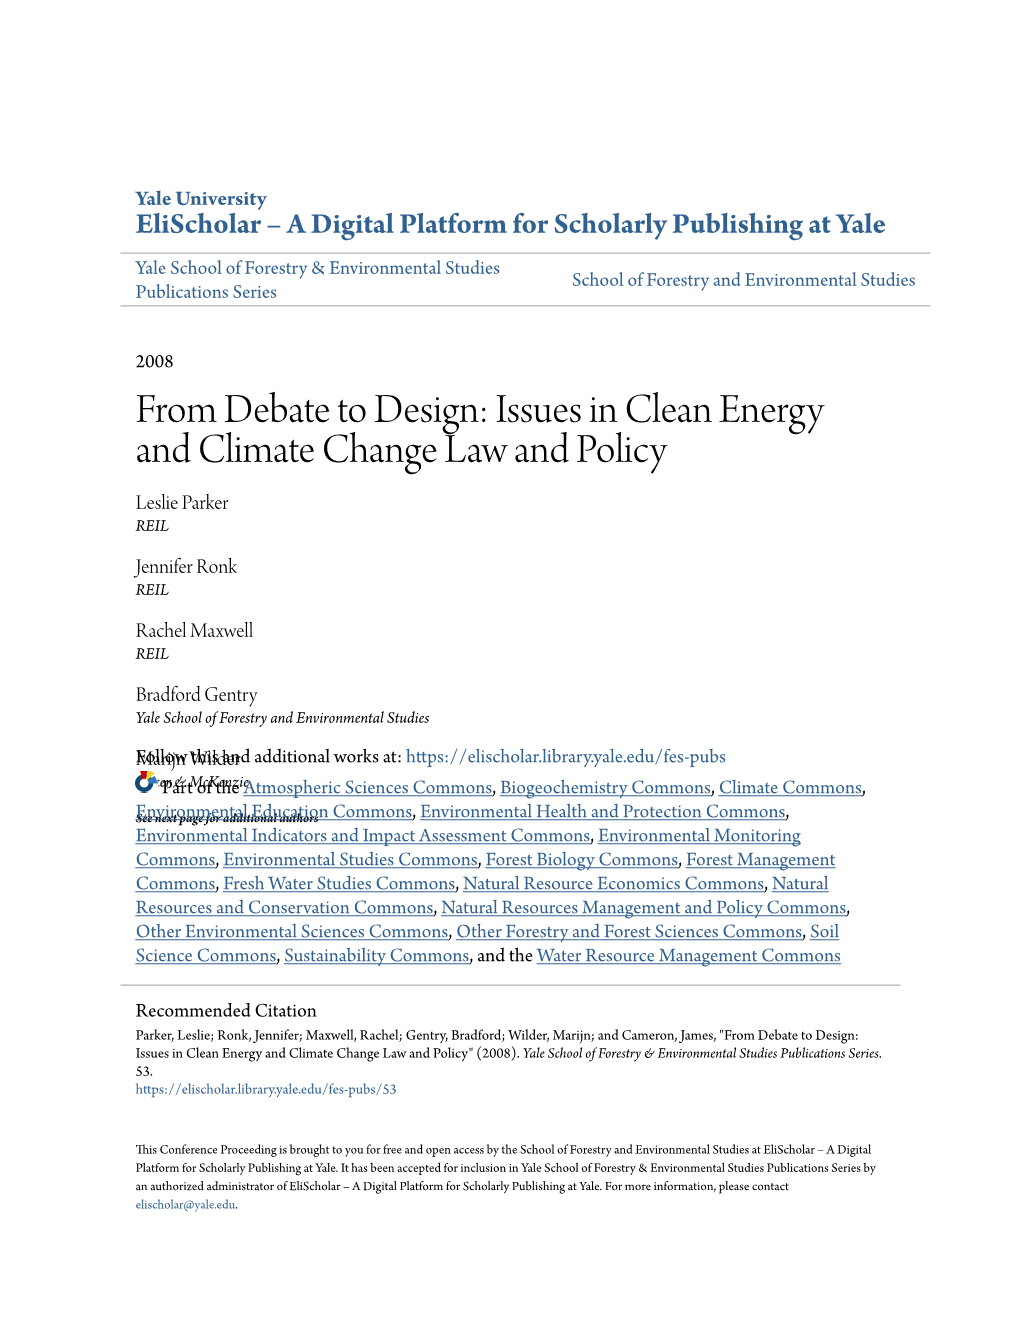 Issues in Clean Energy and Climate Change Law and Policy Leslie Parker REIL